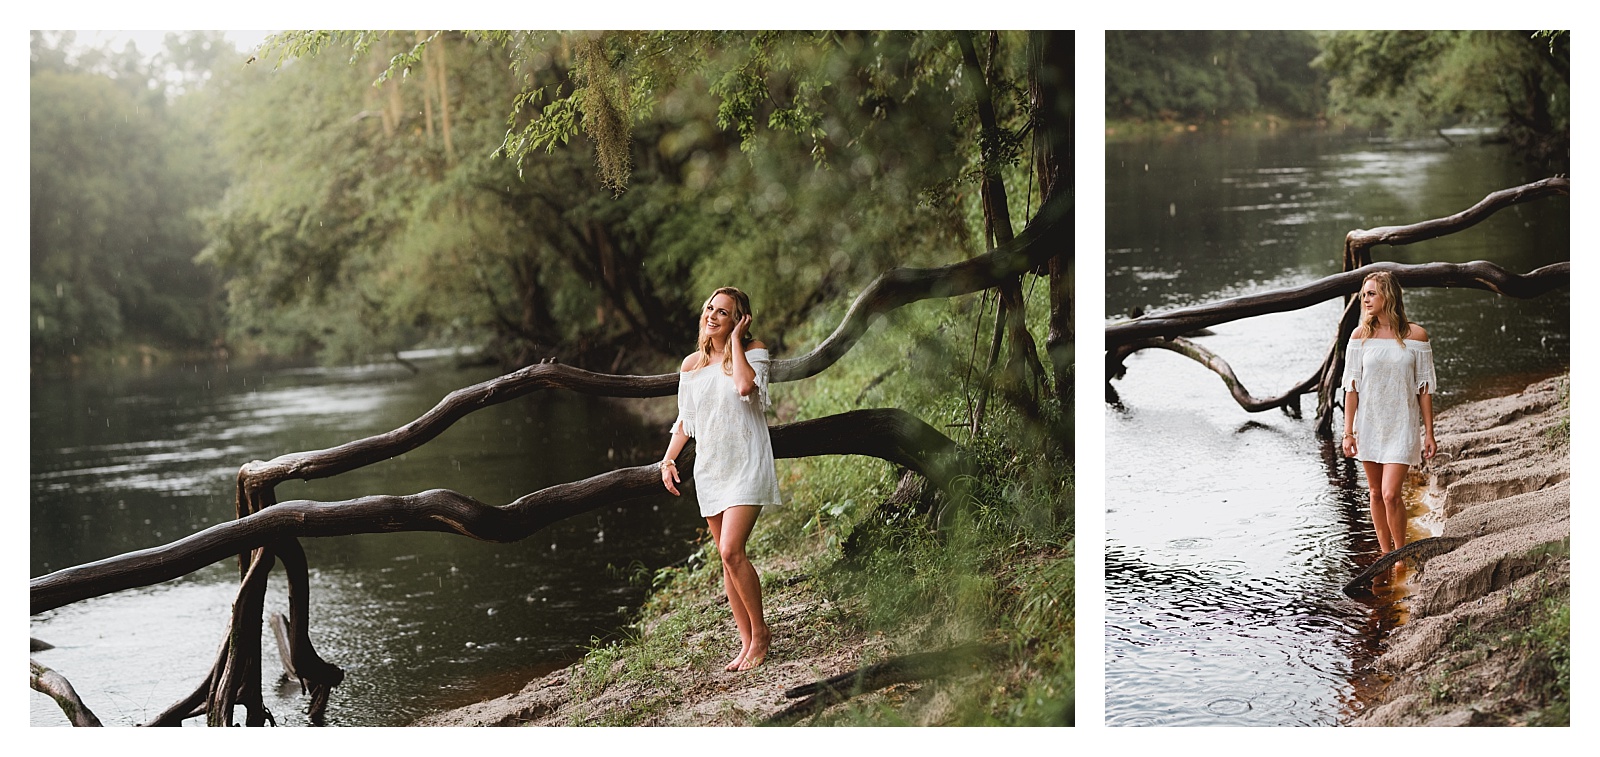 River pictures with senior girl. Suwannee River. Shelly Williams Photography